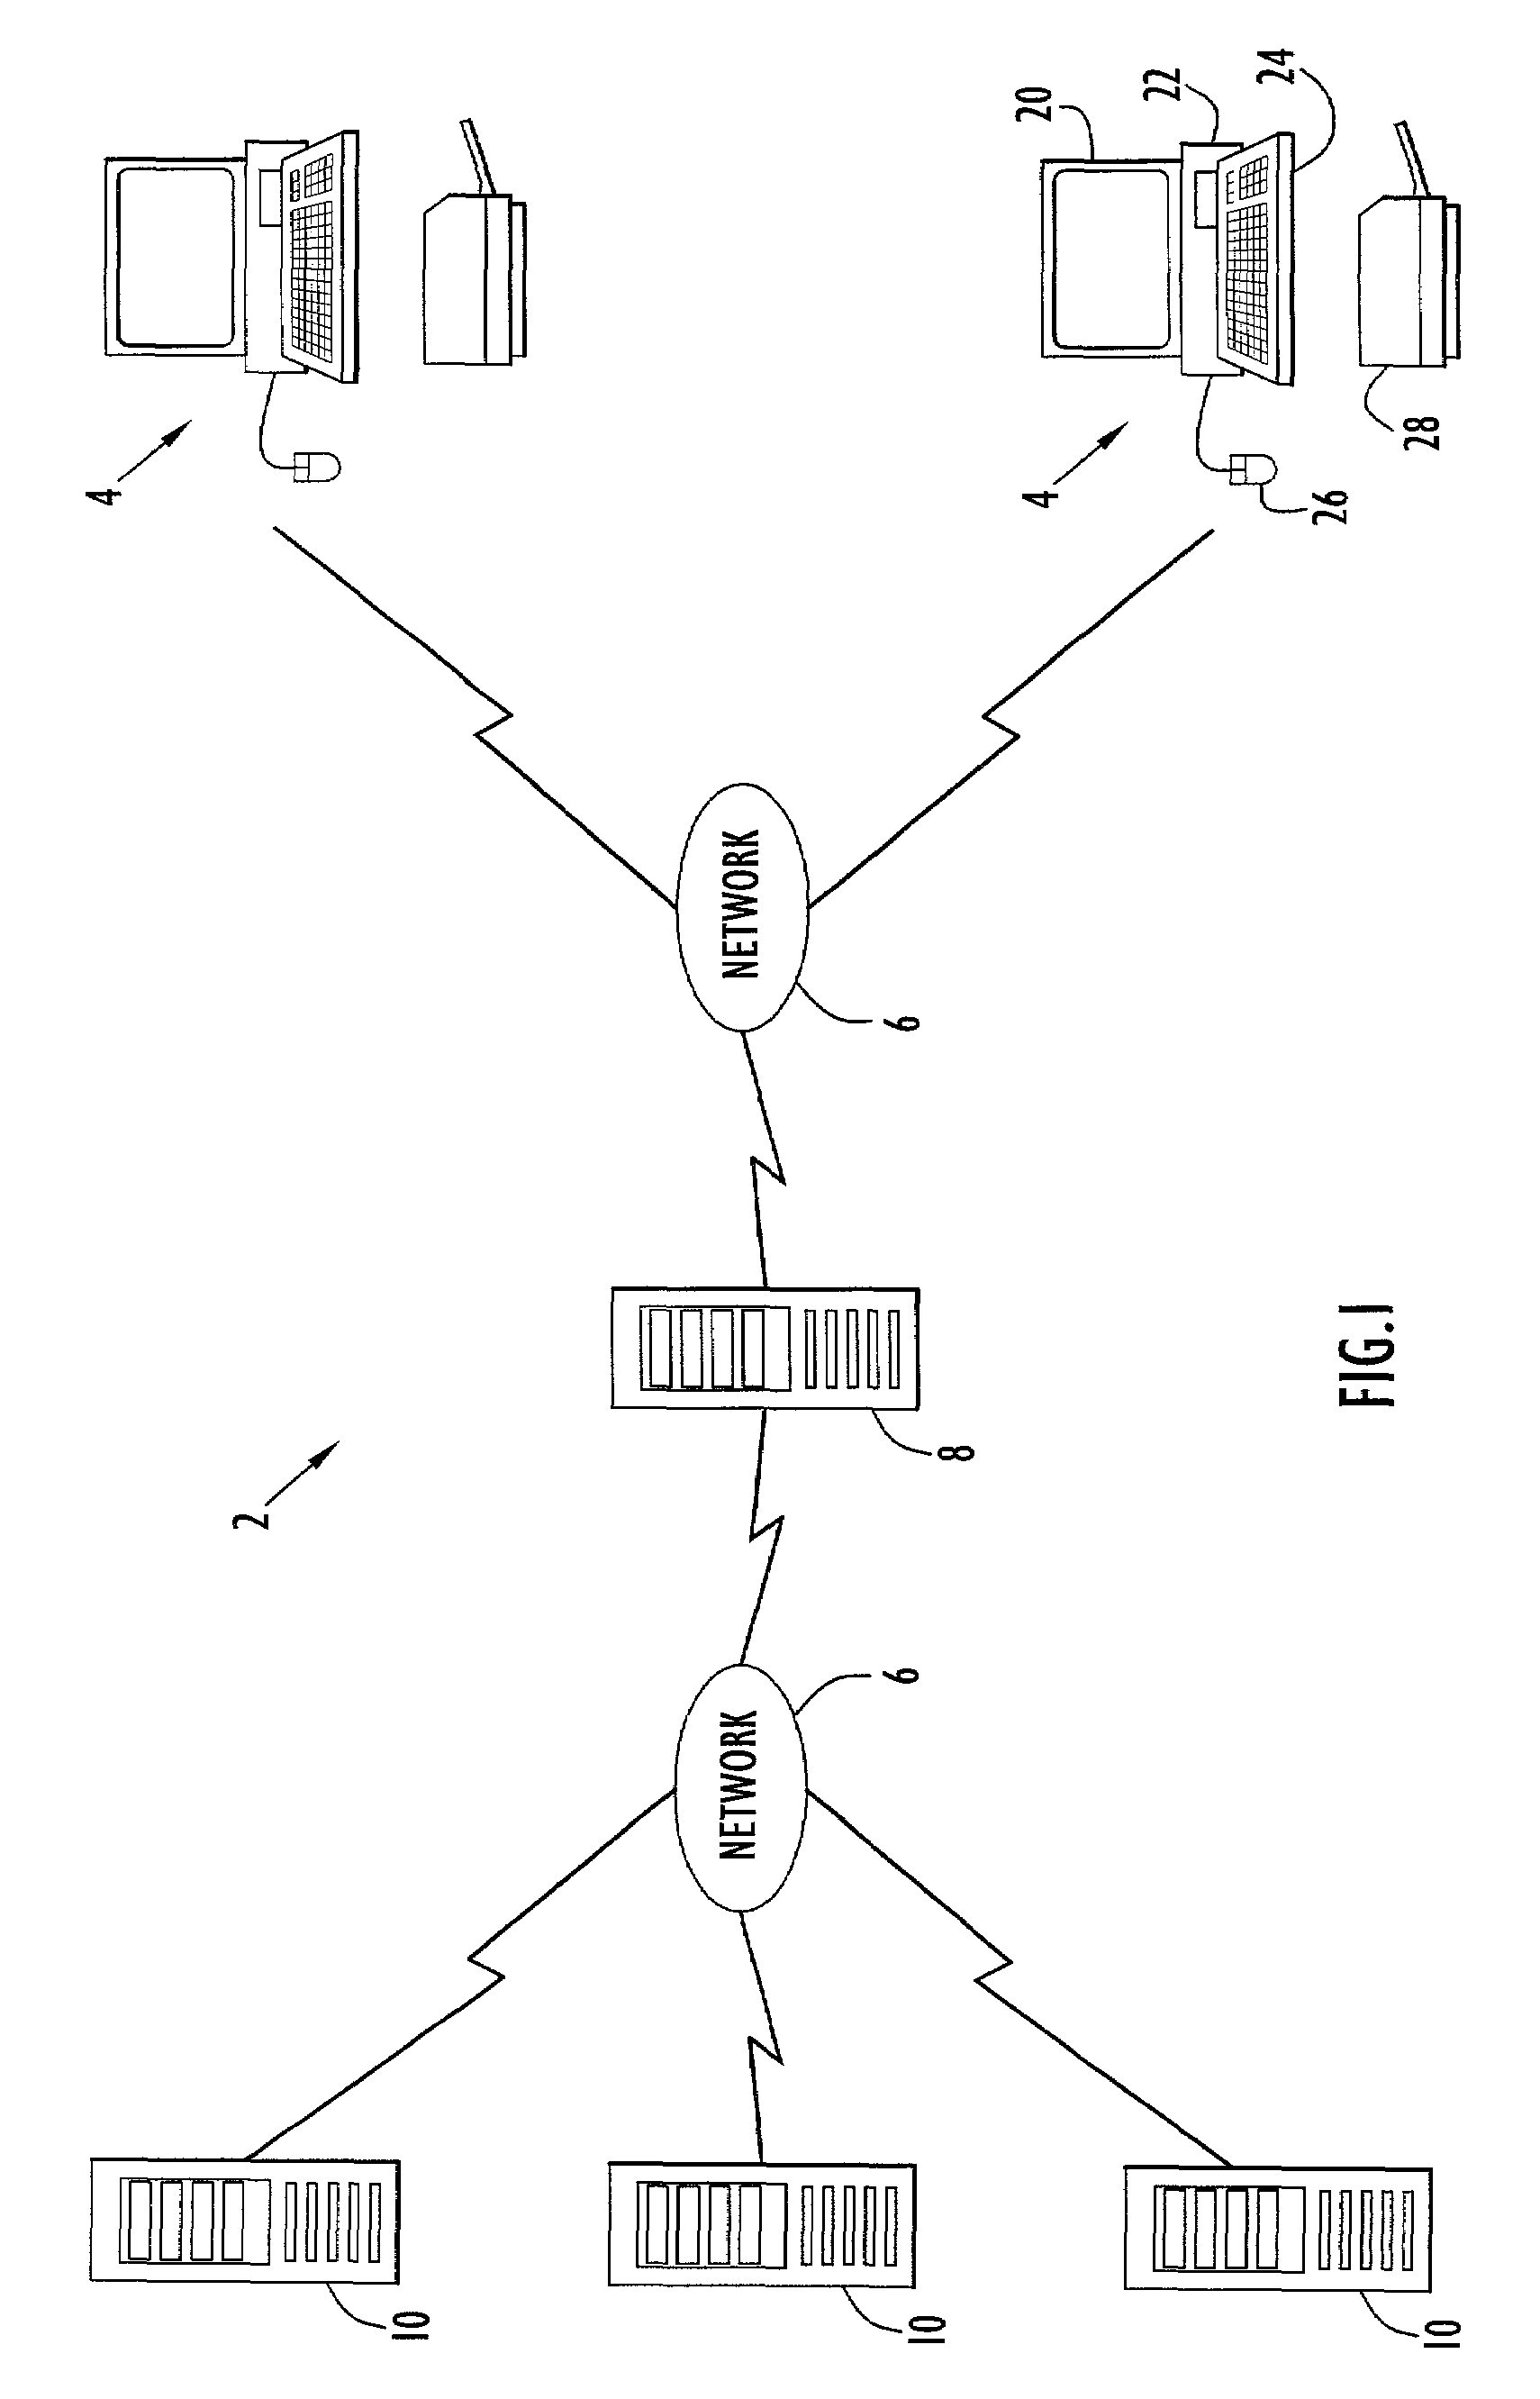 Method and apparatus for facilitating manual payments for transactions conducted over a network